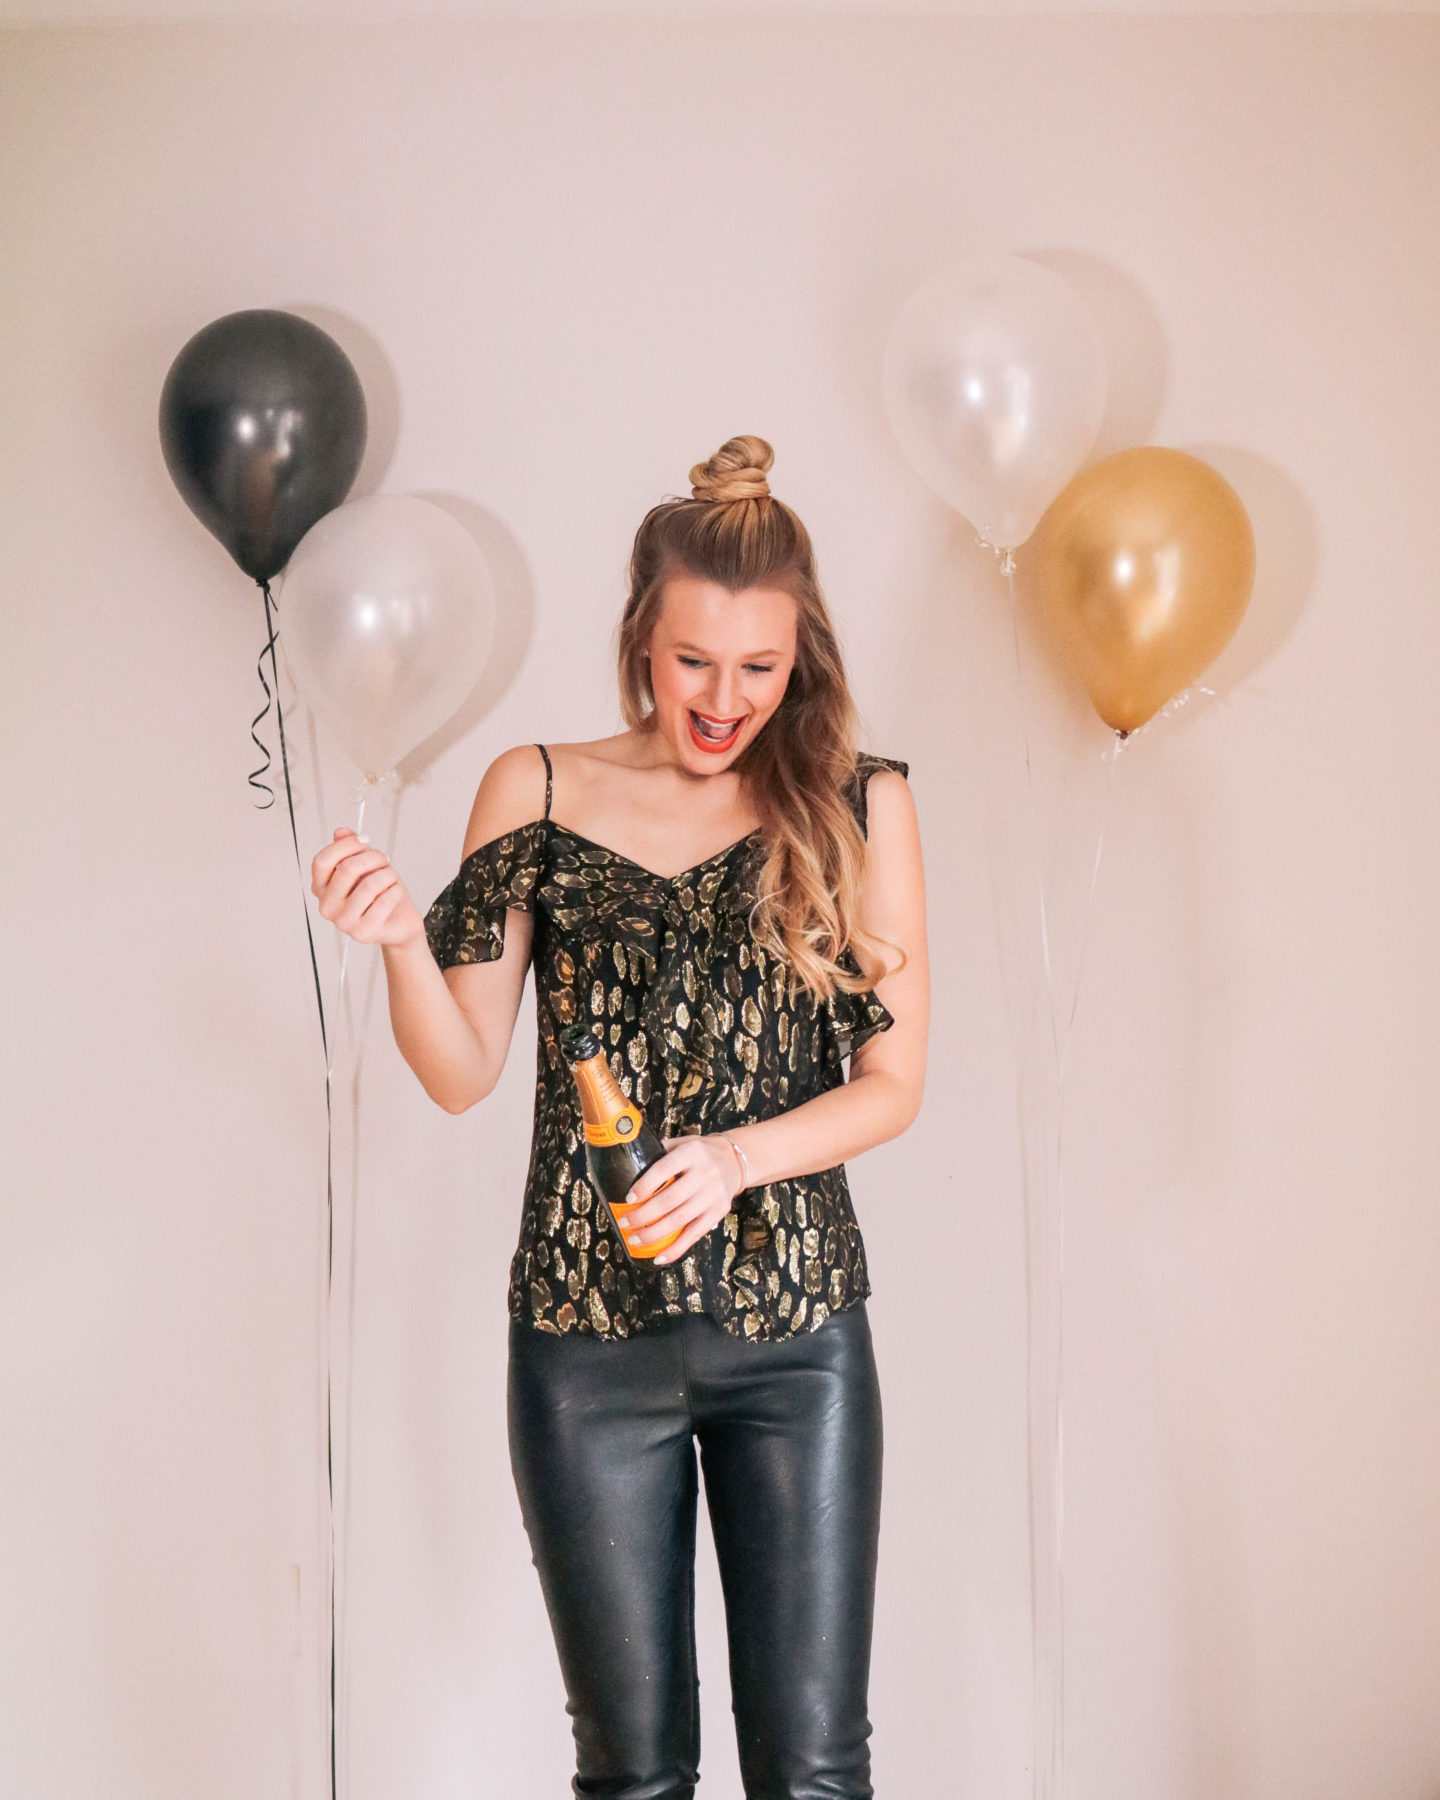 Fashion blogger, Leigha Gardner, of The Lilac Press sharing some designer looks for NYE including this metallic Veronica Beard top and Stella McCartney faux leather leggings.